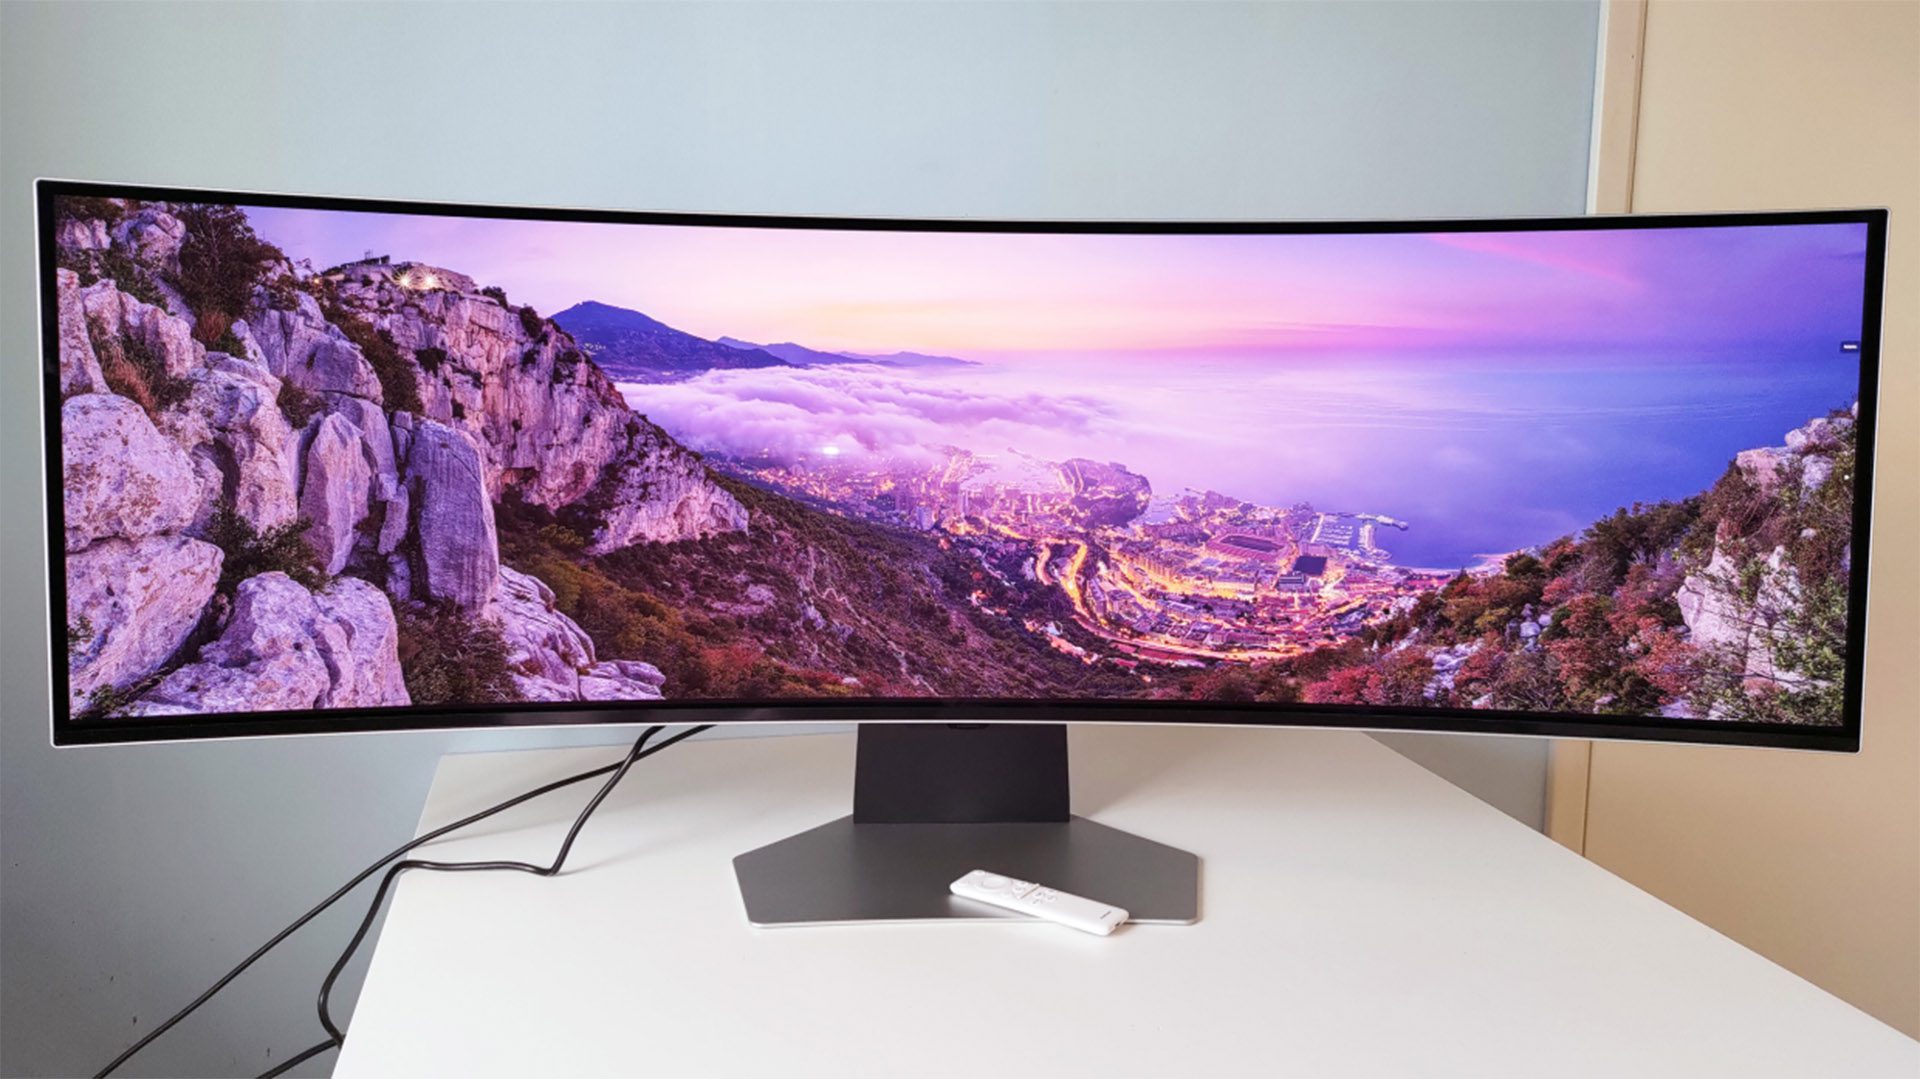 AMD sets higher speed standards for FreeSync monitors